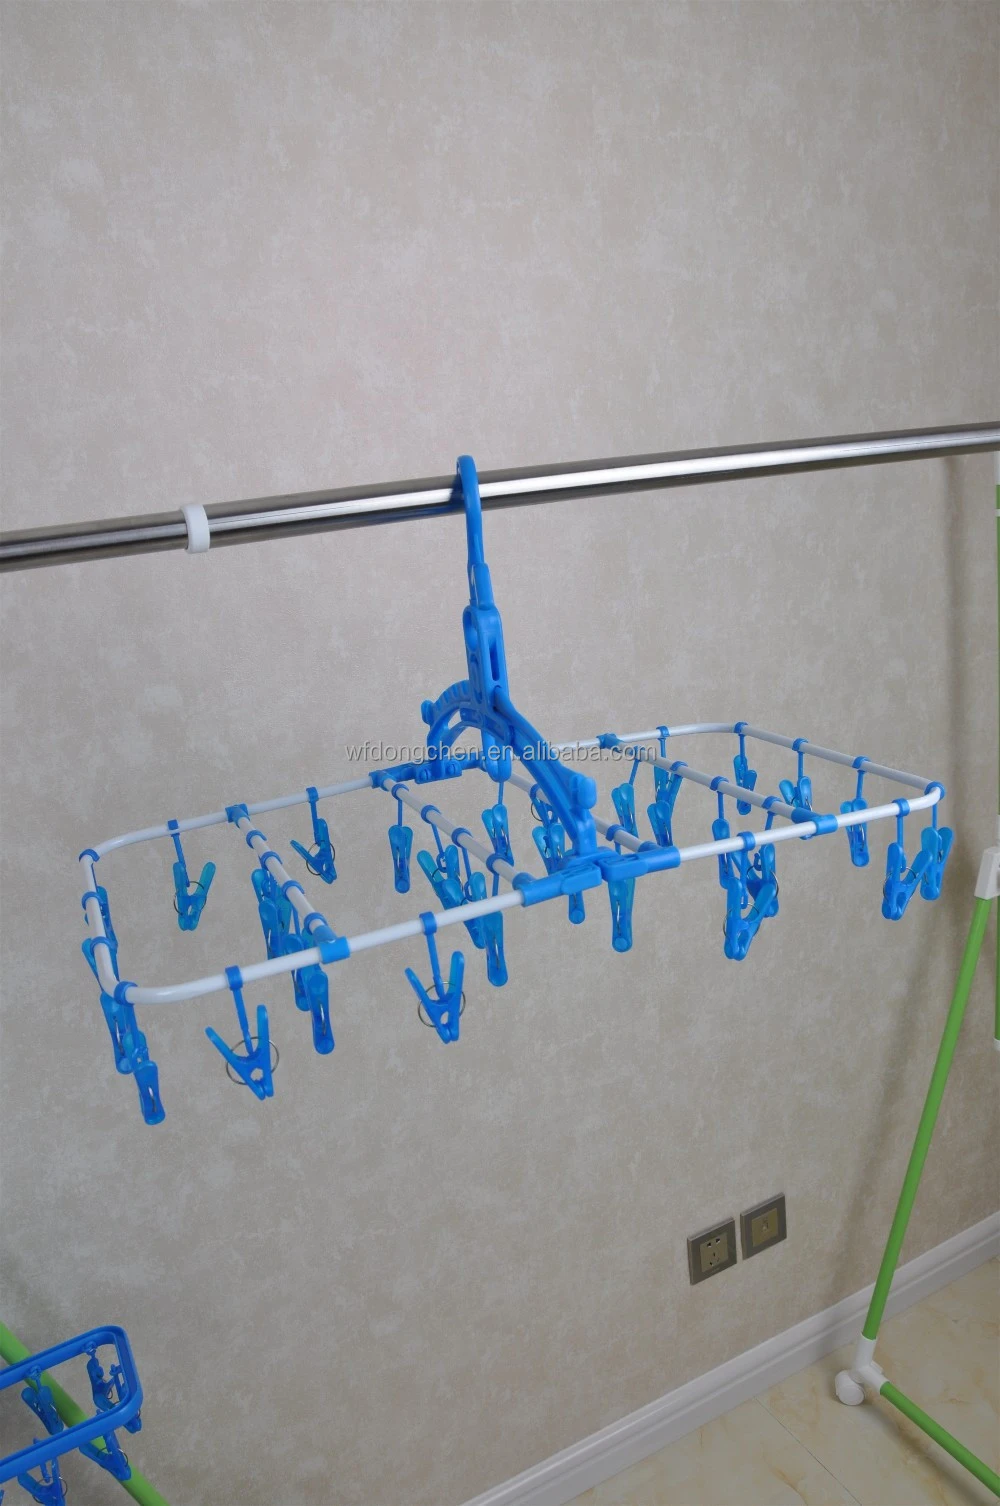 Balcony Sock Drying Hanger With 32 Pegs